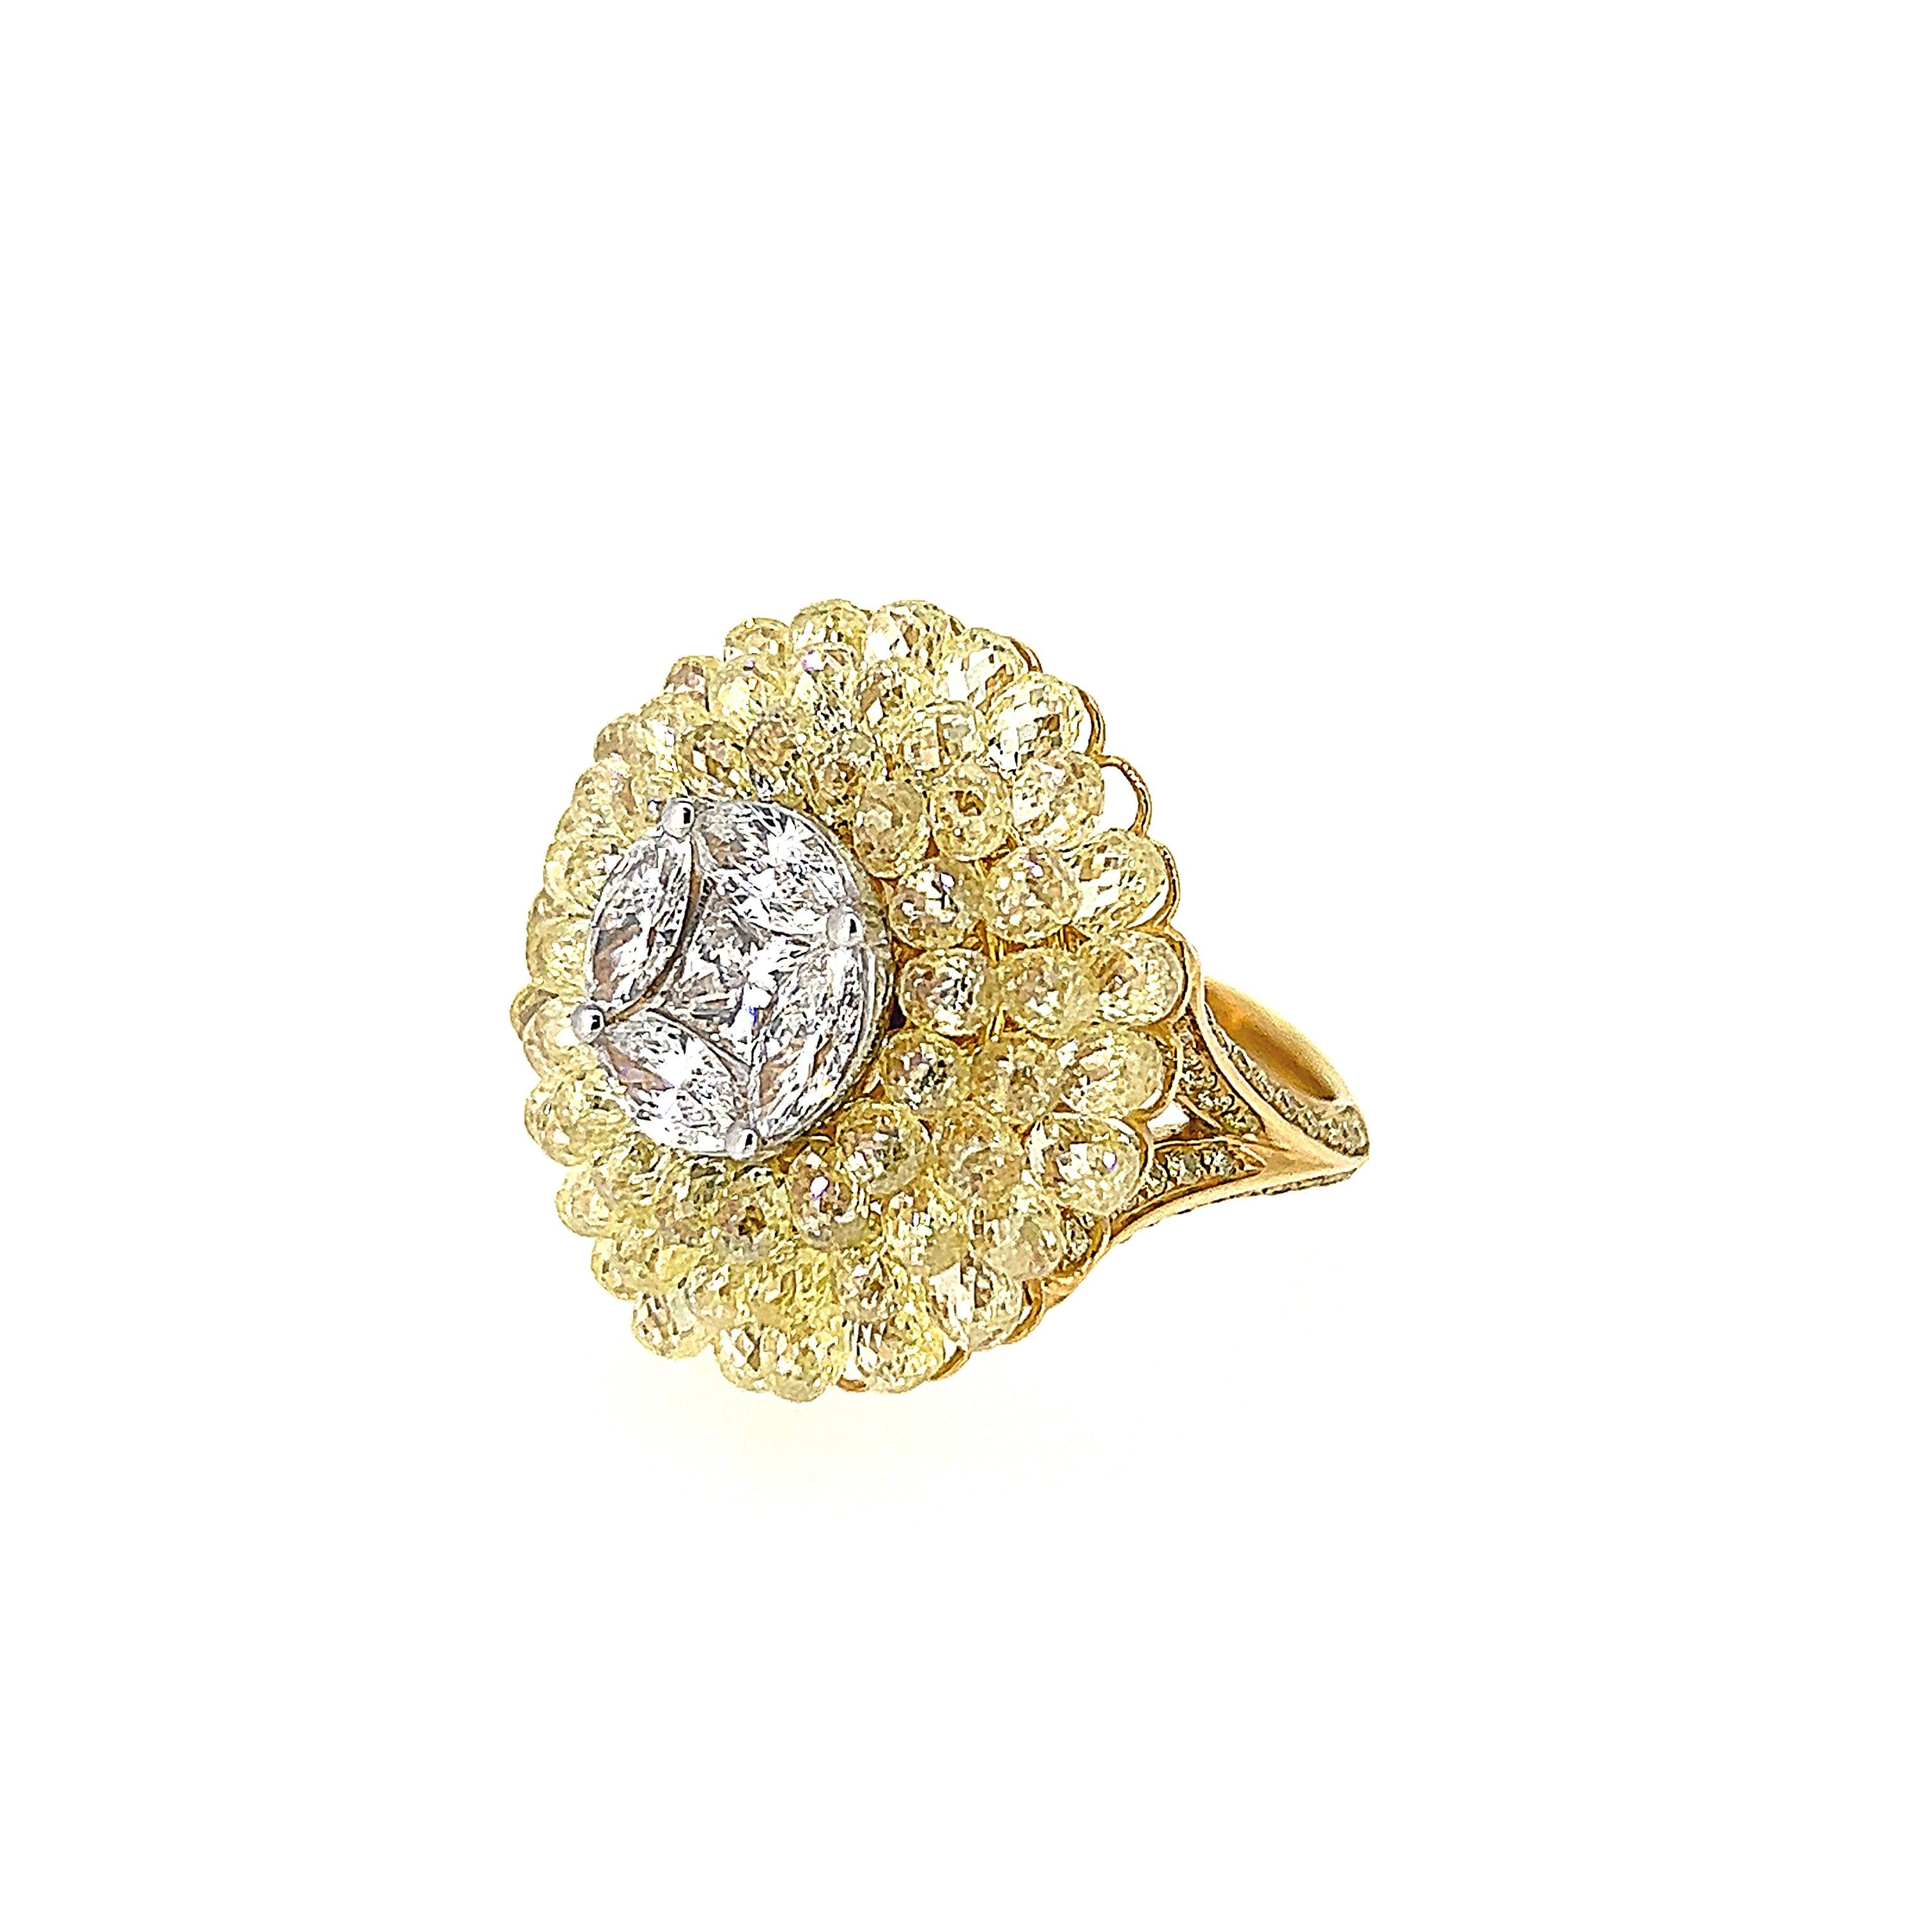 This is a captivating Yellow Diamond and Diamond Flower Ring which is a perfect balance of style and grace.  Set with radiant 4 Marquise cut Diamonds and 1 Princess cut Diamonds at the center, it features 150 pieces of dazzling Briolette Yellow